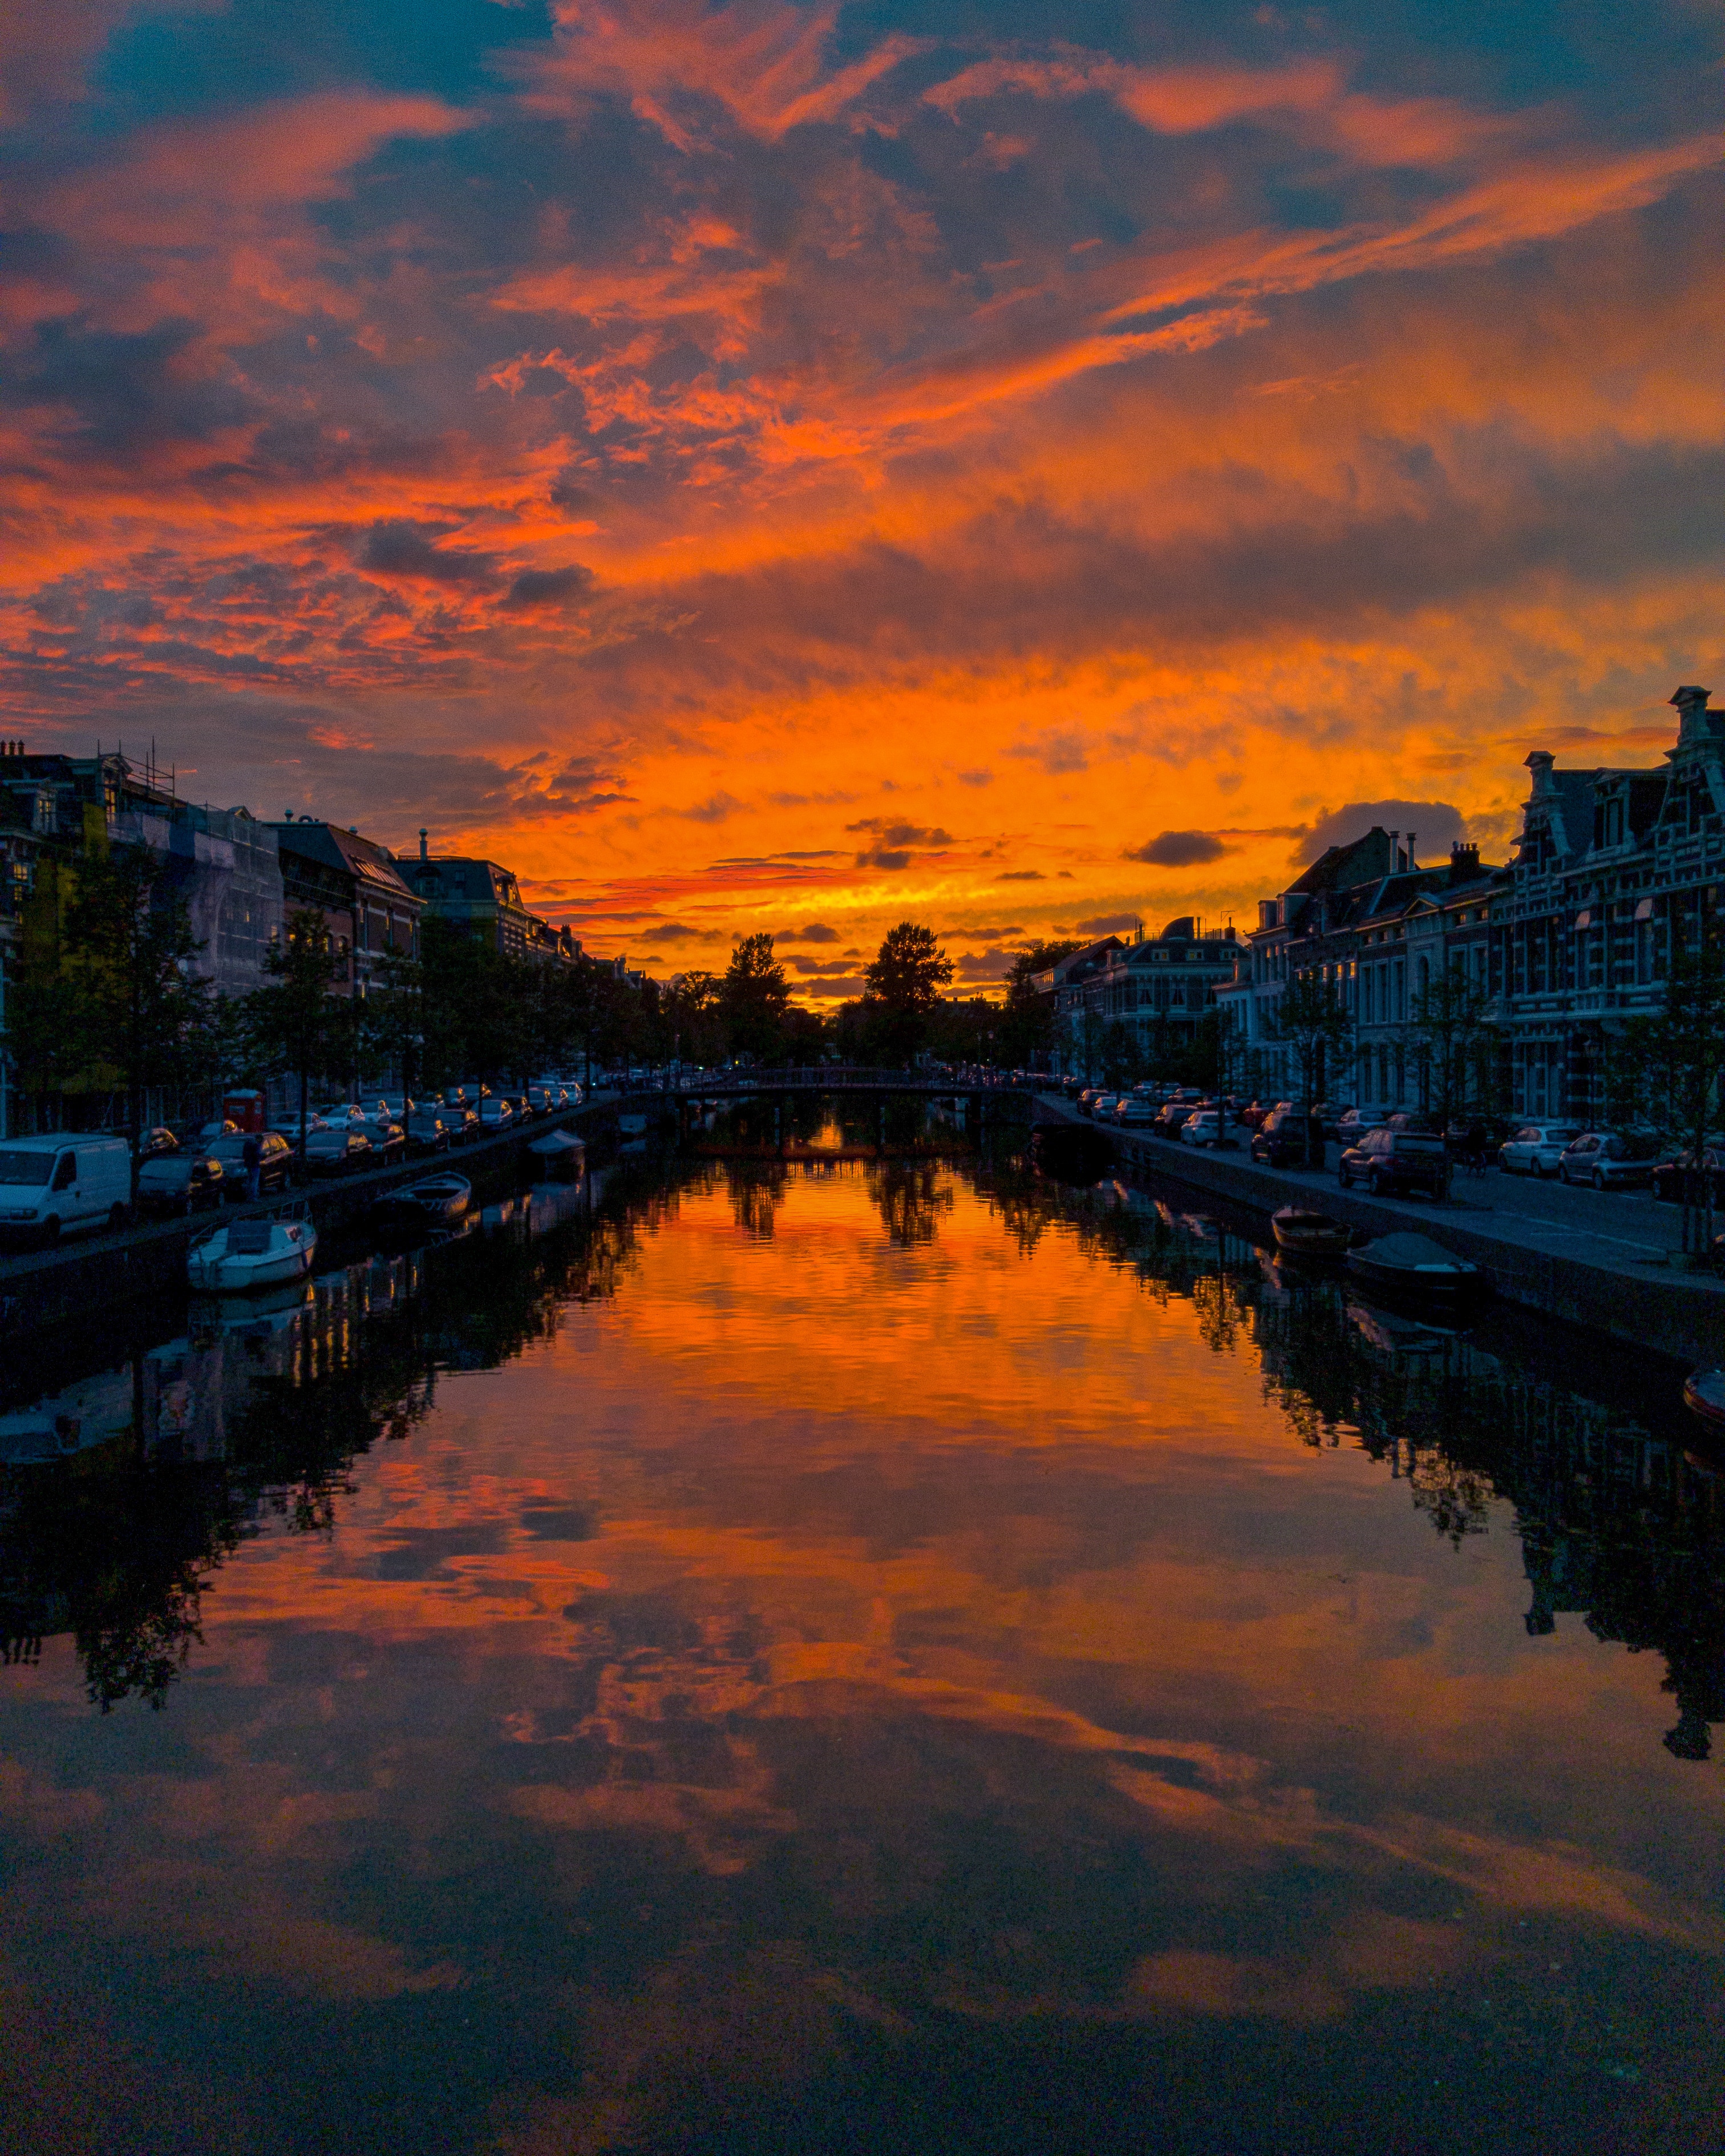 rivers, netherlands, cities, sunset, city, channel lock screen backgrounds